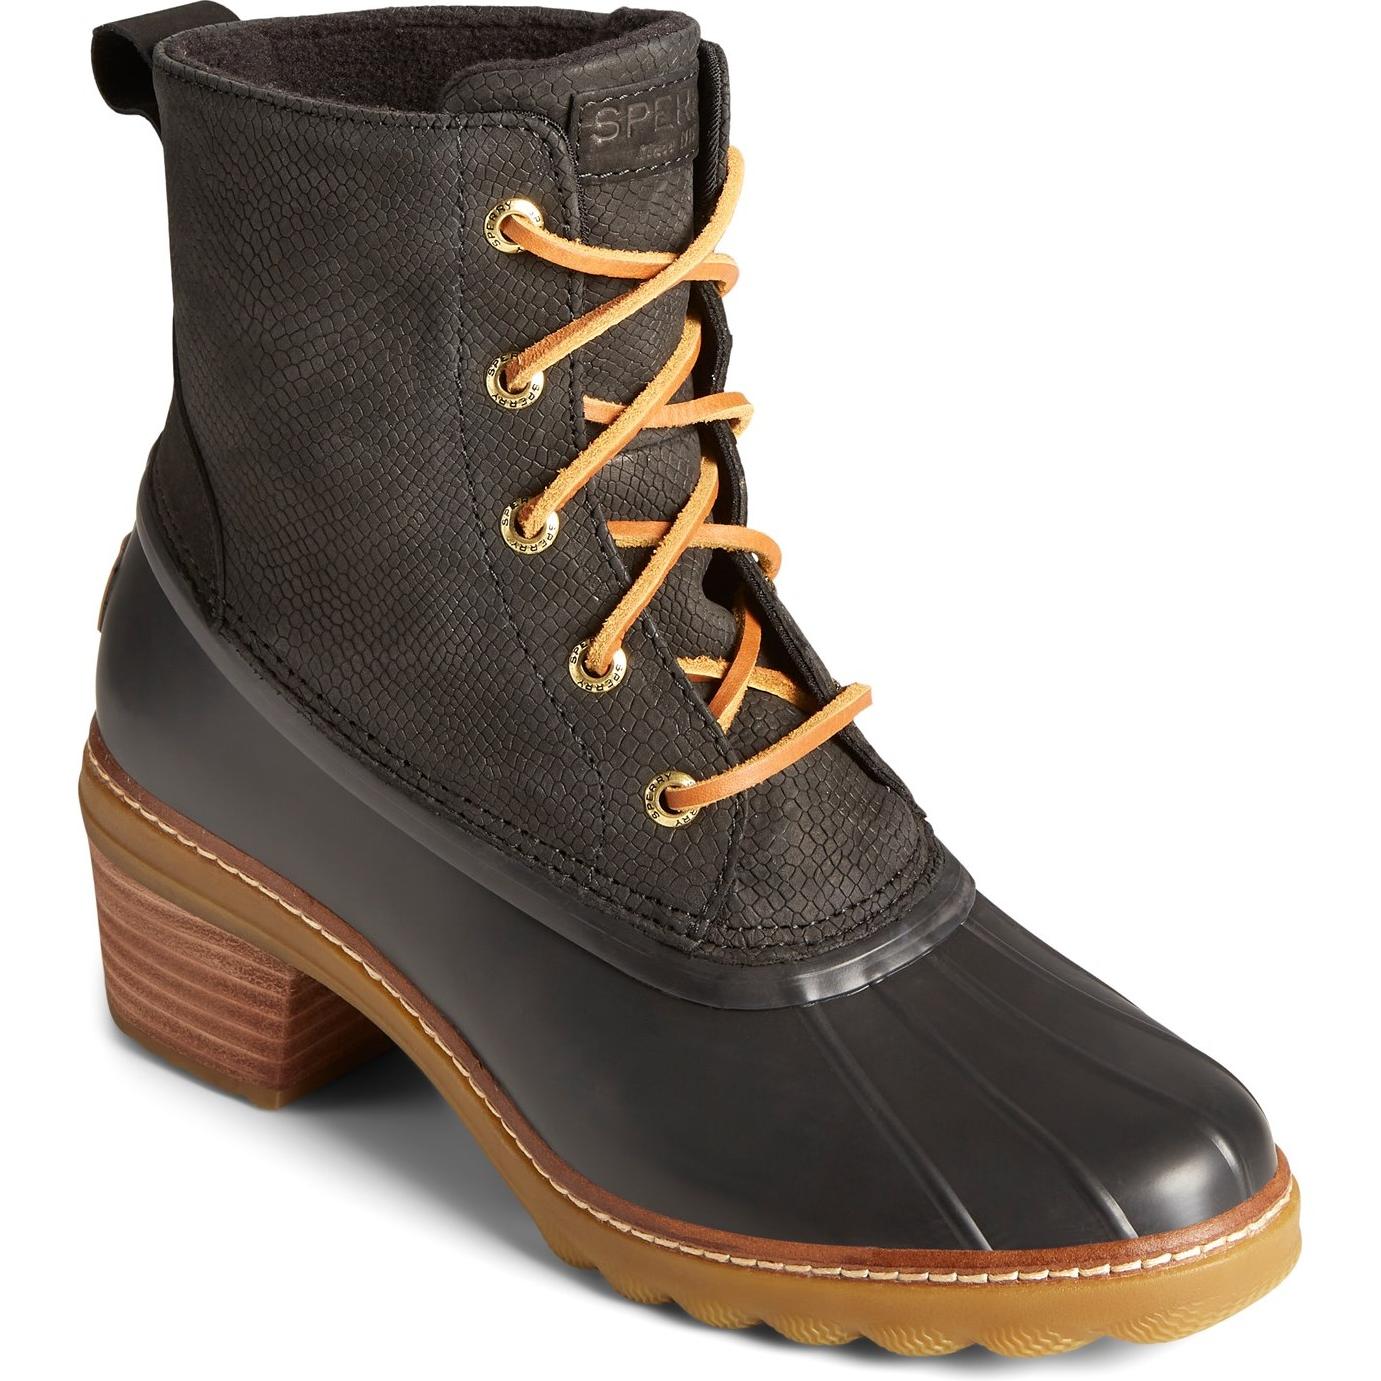 Sperry Top-sider Saltwater Heel Snake Ankle Boot